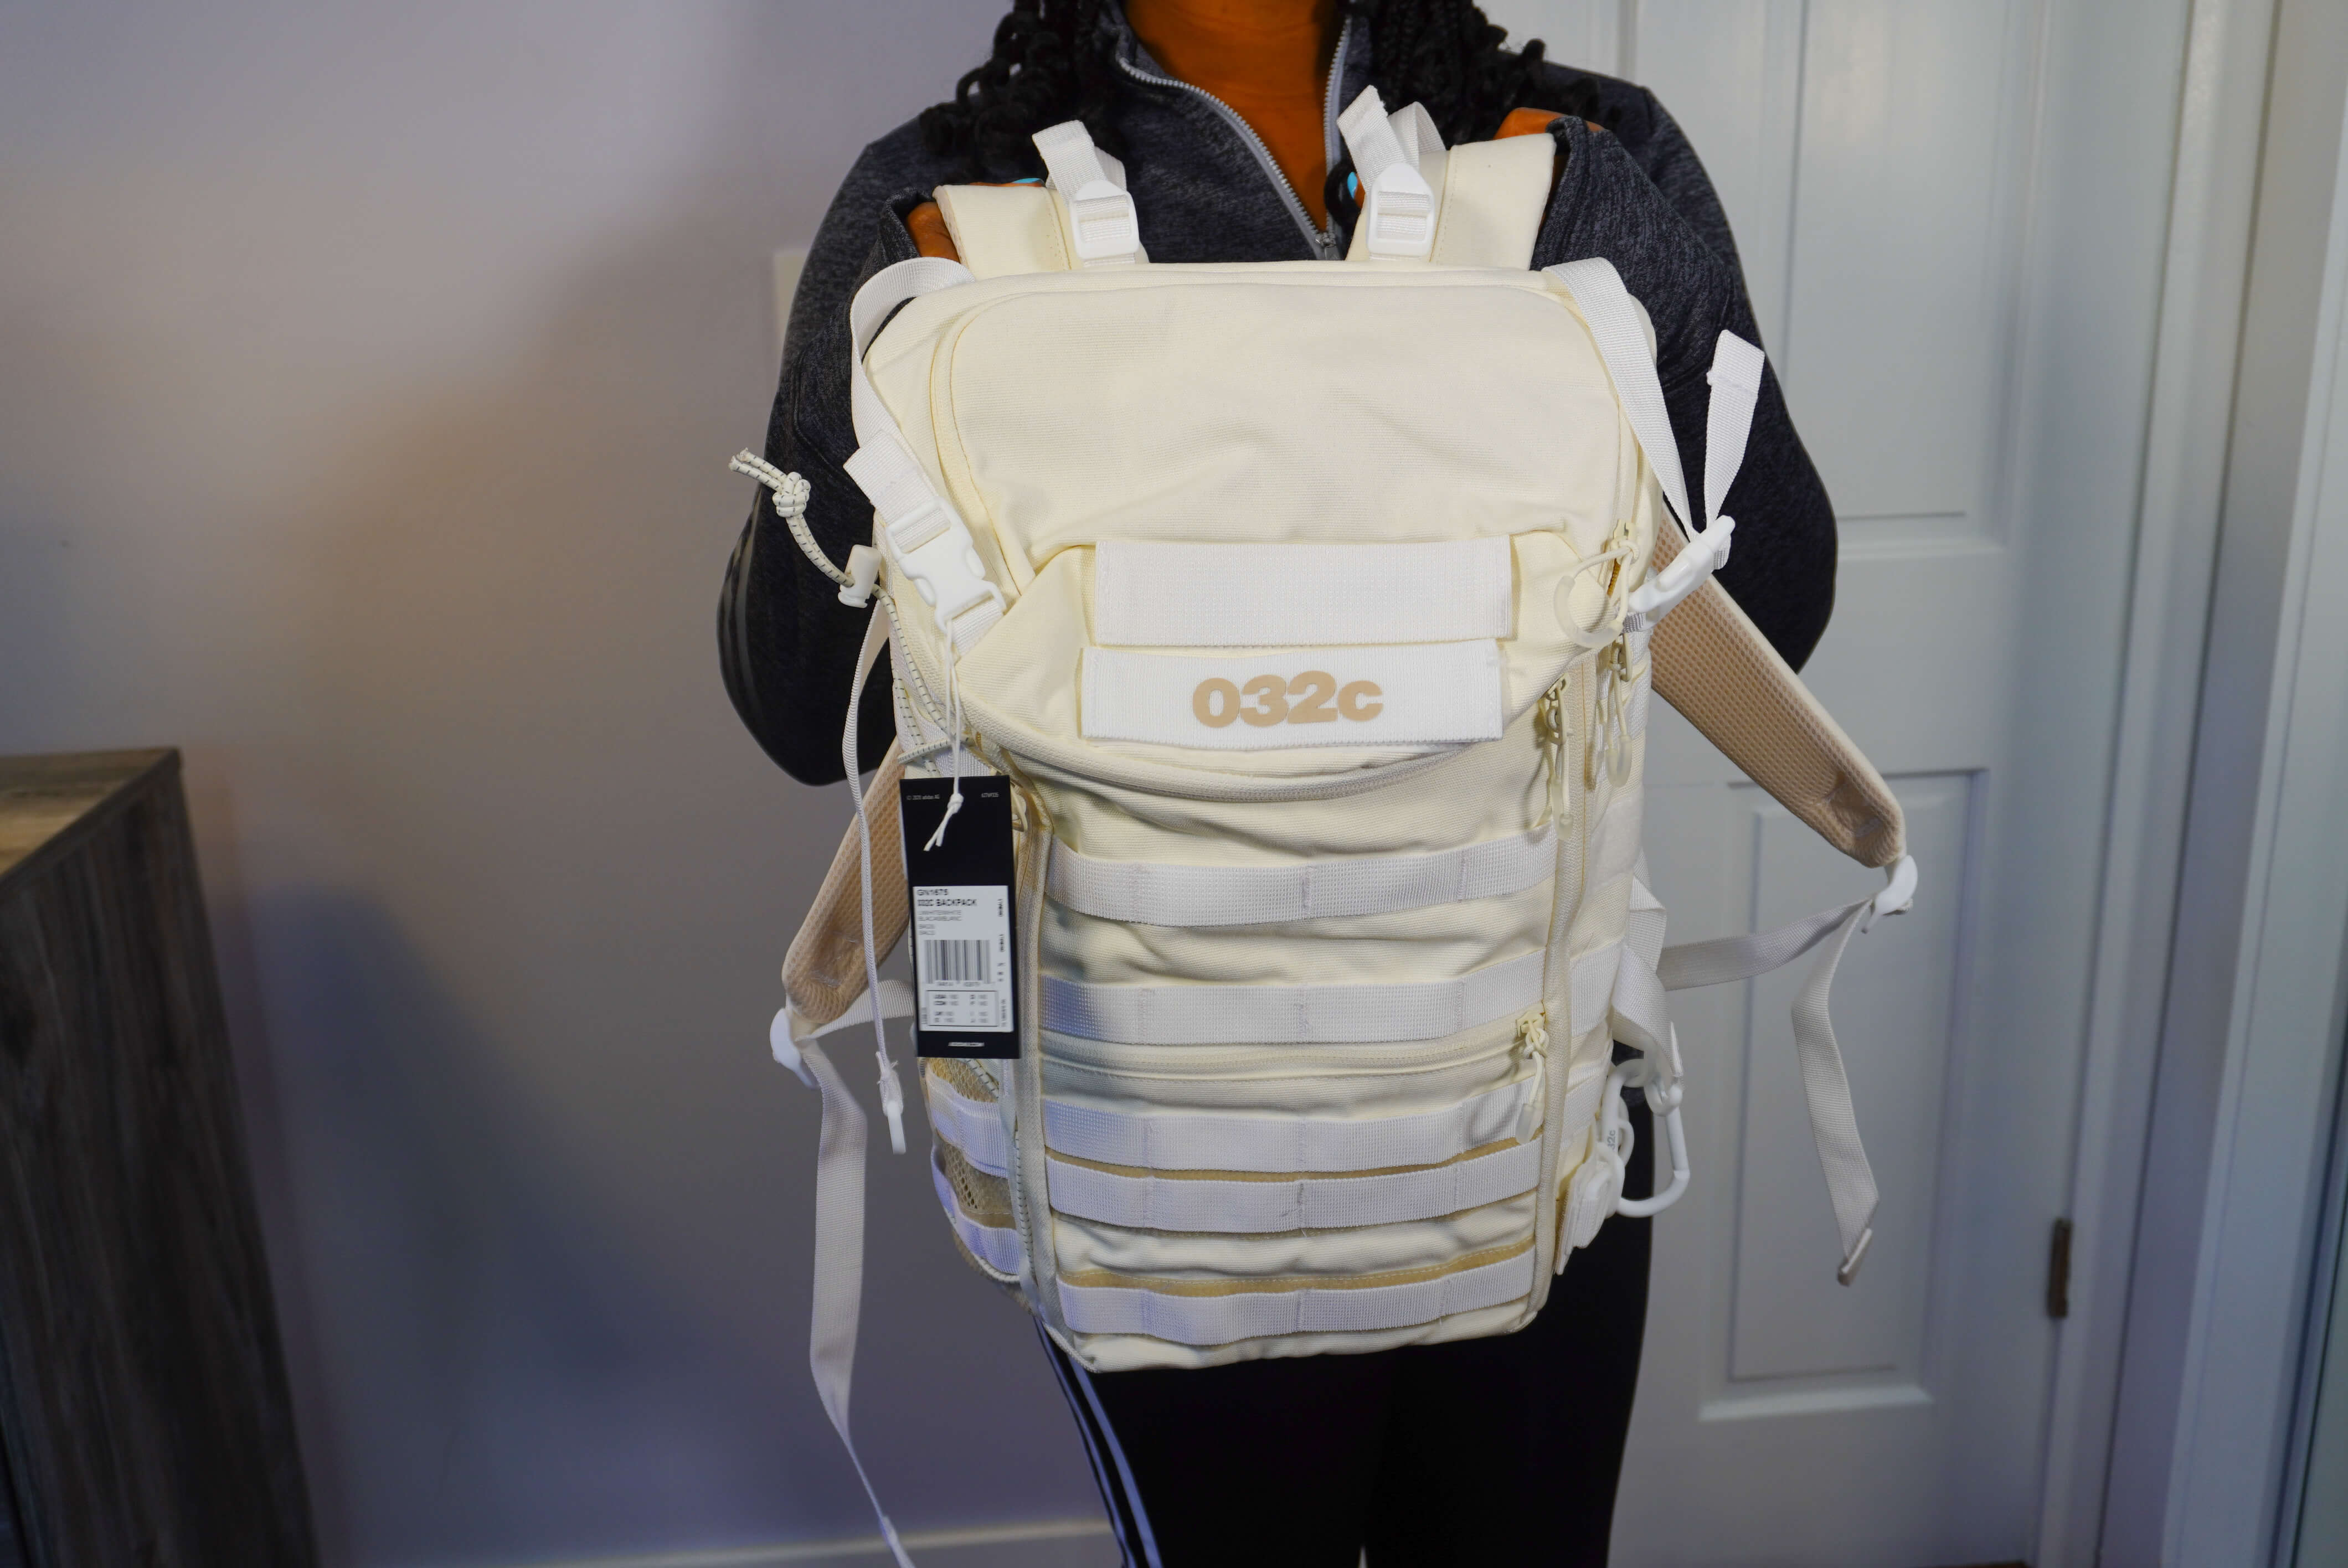 Image of me holding the Adidas X 032c backpack. The backpack is a cream color with white straps. On the front it says 032c and has hooks on the side.